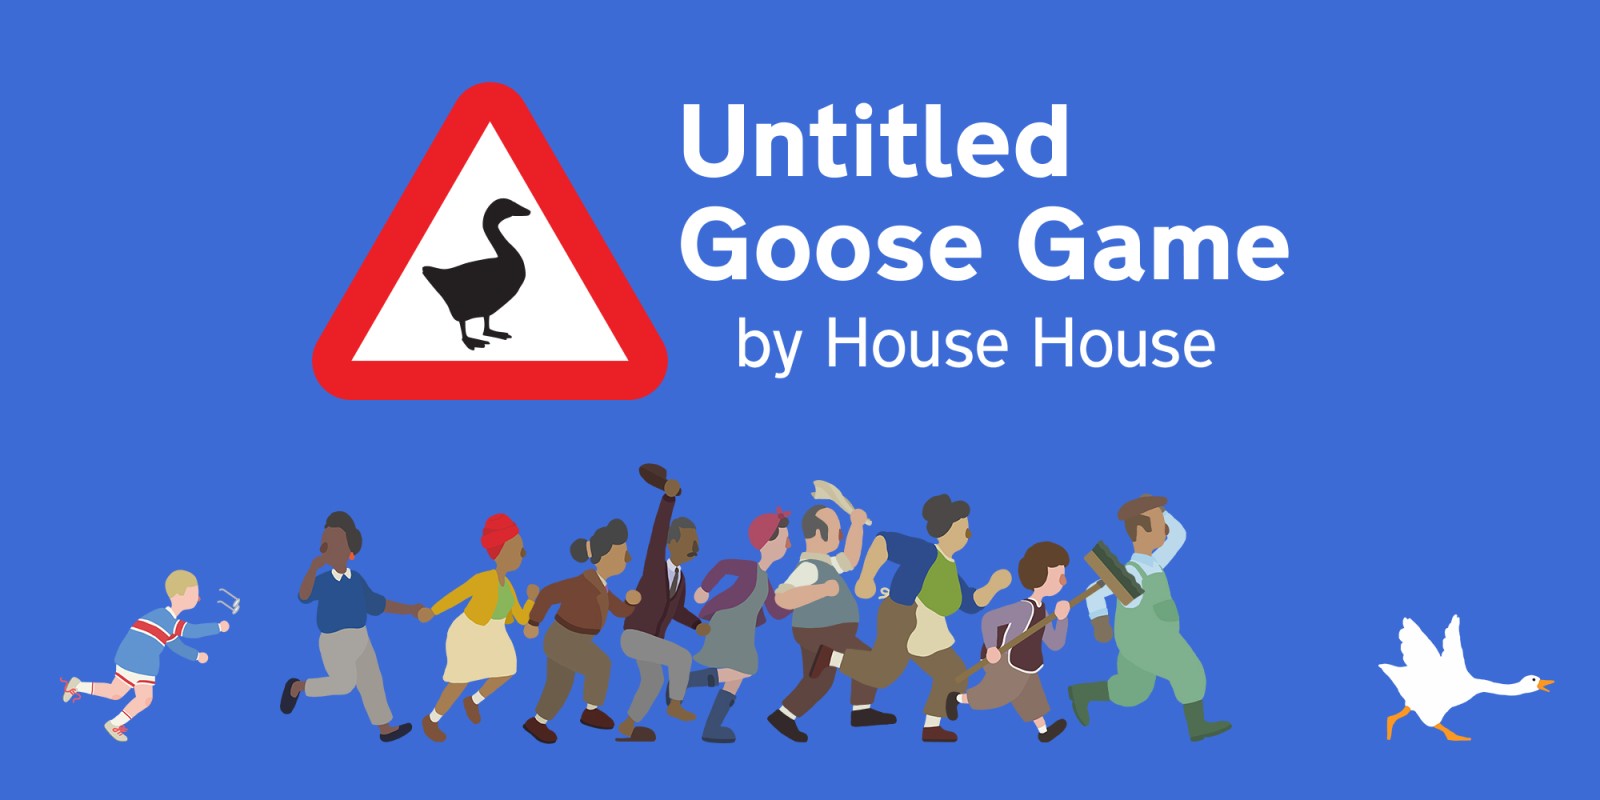 Untitled Goose Game Nintendo Switch Download Software Spiele Nintendo